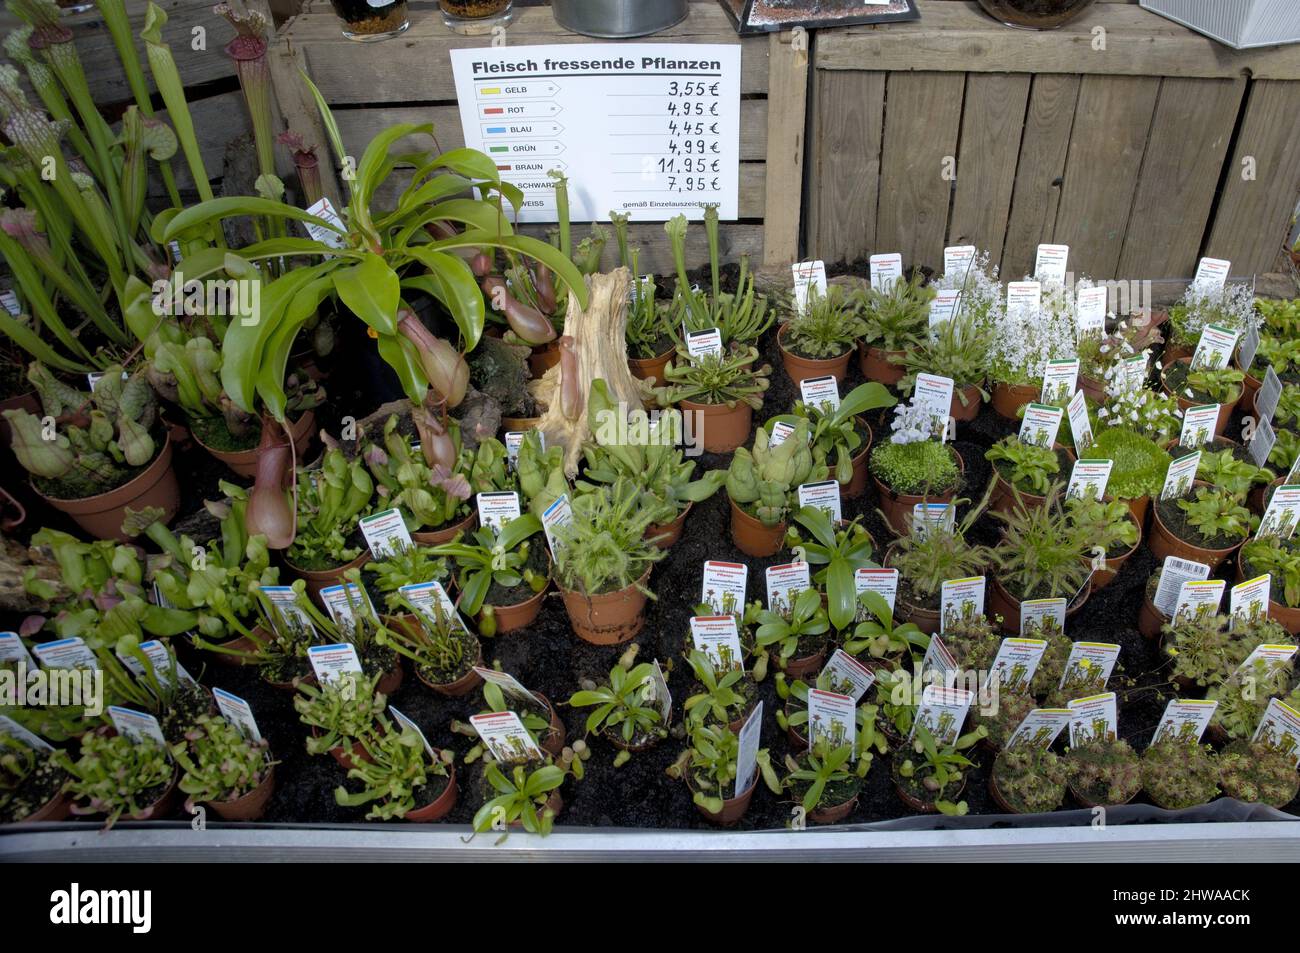 carnivorous plants to sell in a garden center, Germany Stock Photo